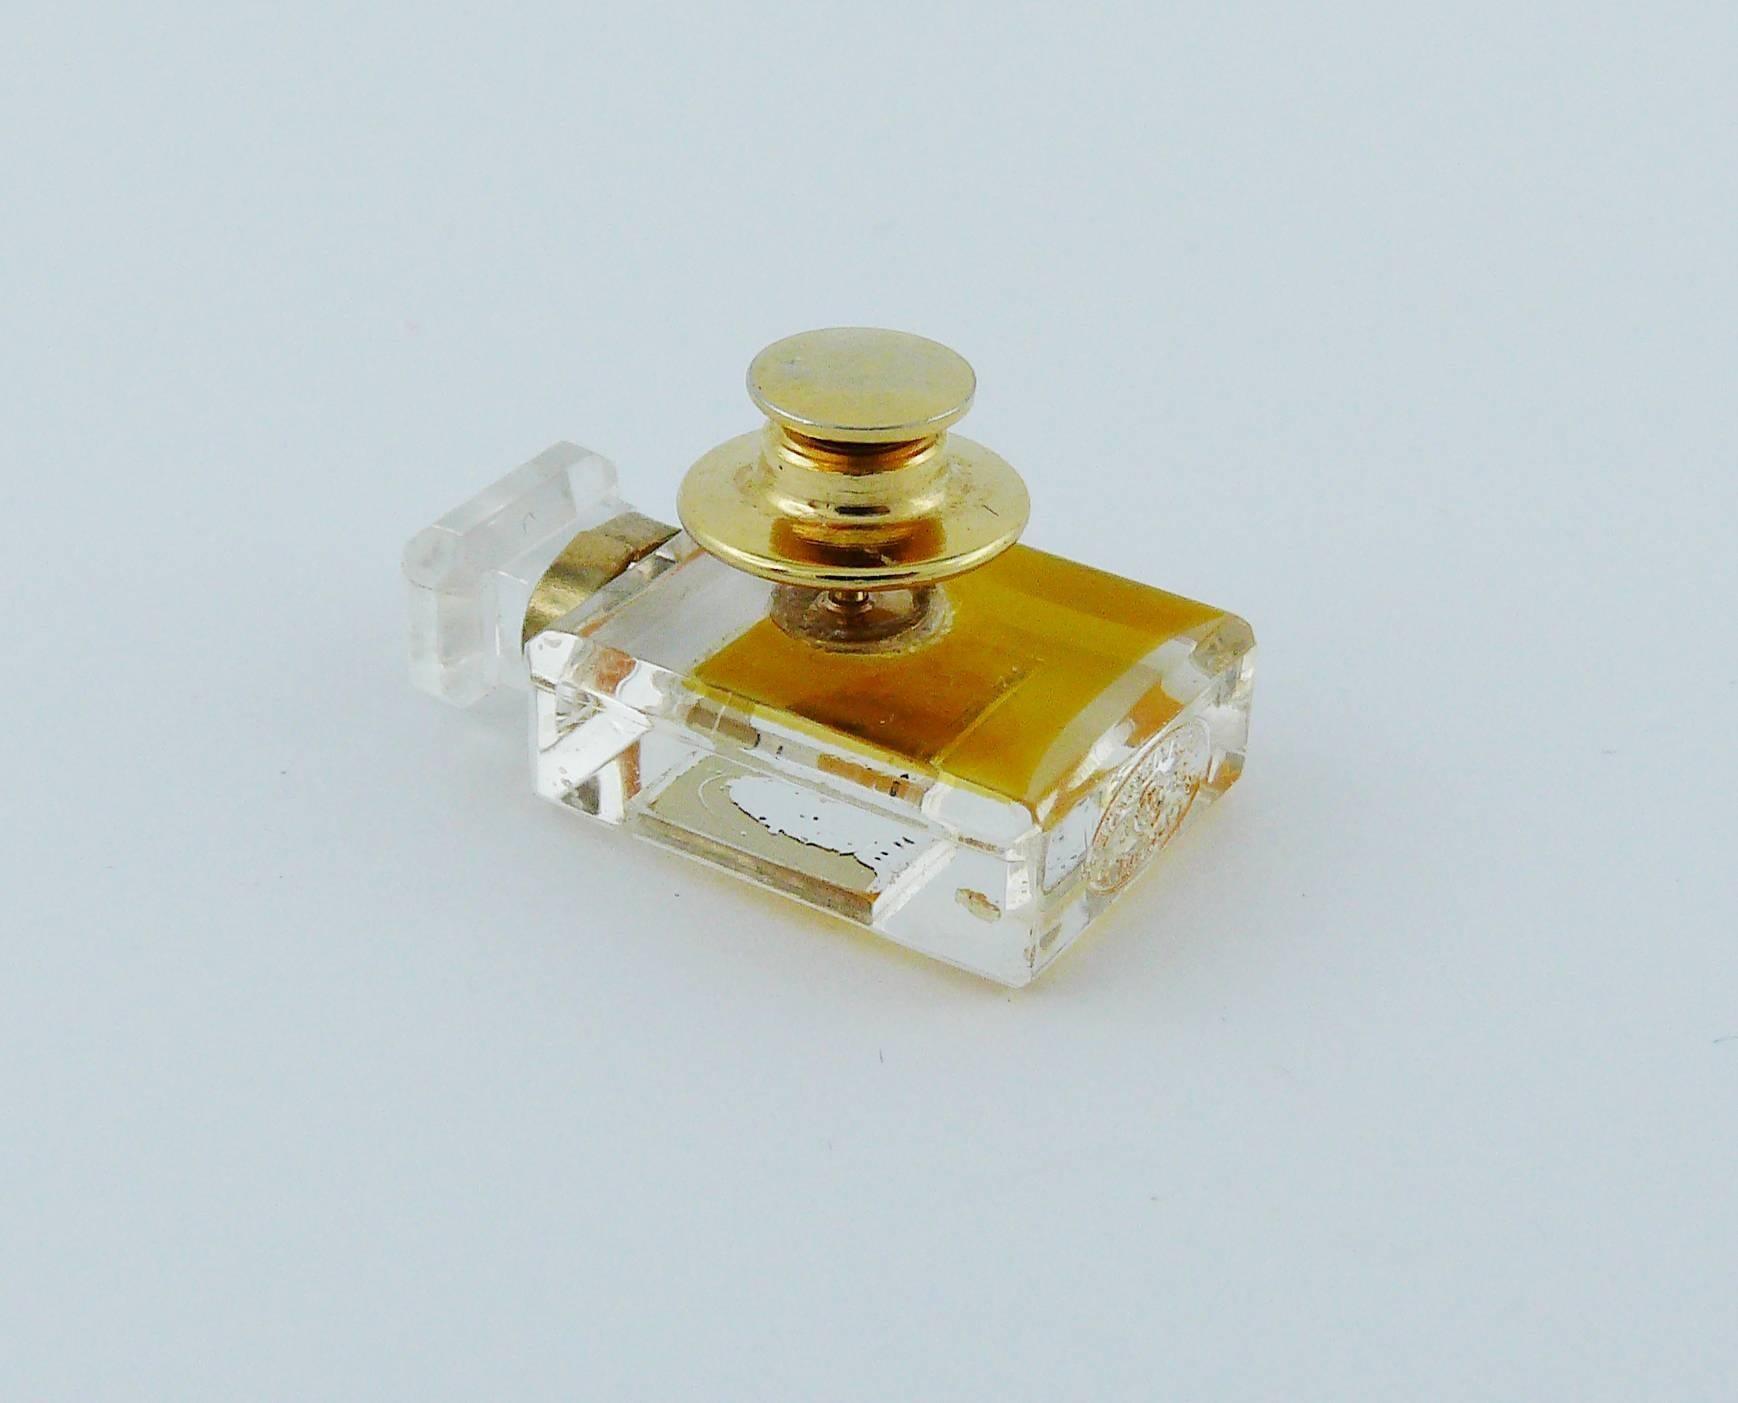 CHANEL iconic No. 5 resin perfume bottle pin brooch with gold toned hardware.

Embossed CHANEL 05 P Made in France.

Indicative measurements : height approx. 2.4 cm (0.94 inch) / width approx. 1.4 cm (0.55 inch).

JEWELRY CONDITION CHART
- New or